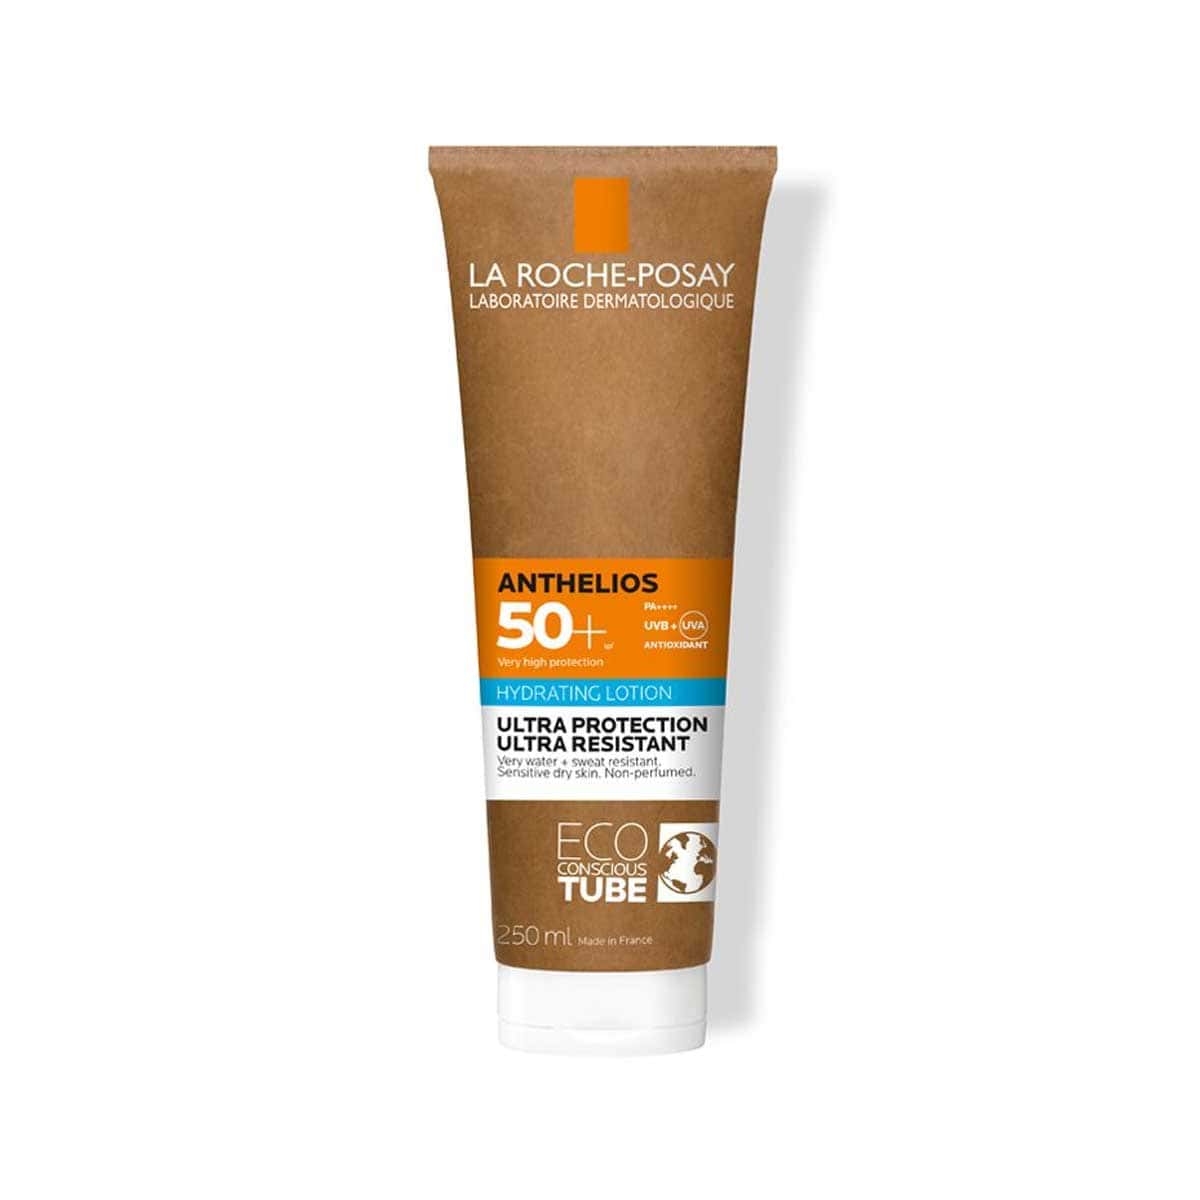 La-Roche-Posay-Anthelios-Hydrating-Lotion-SPF50+-Eco-Conscious-Tube-250-ml-3337875761123